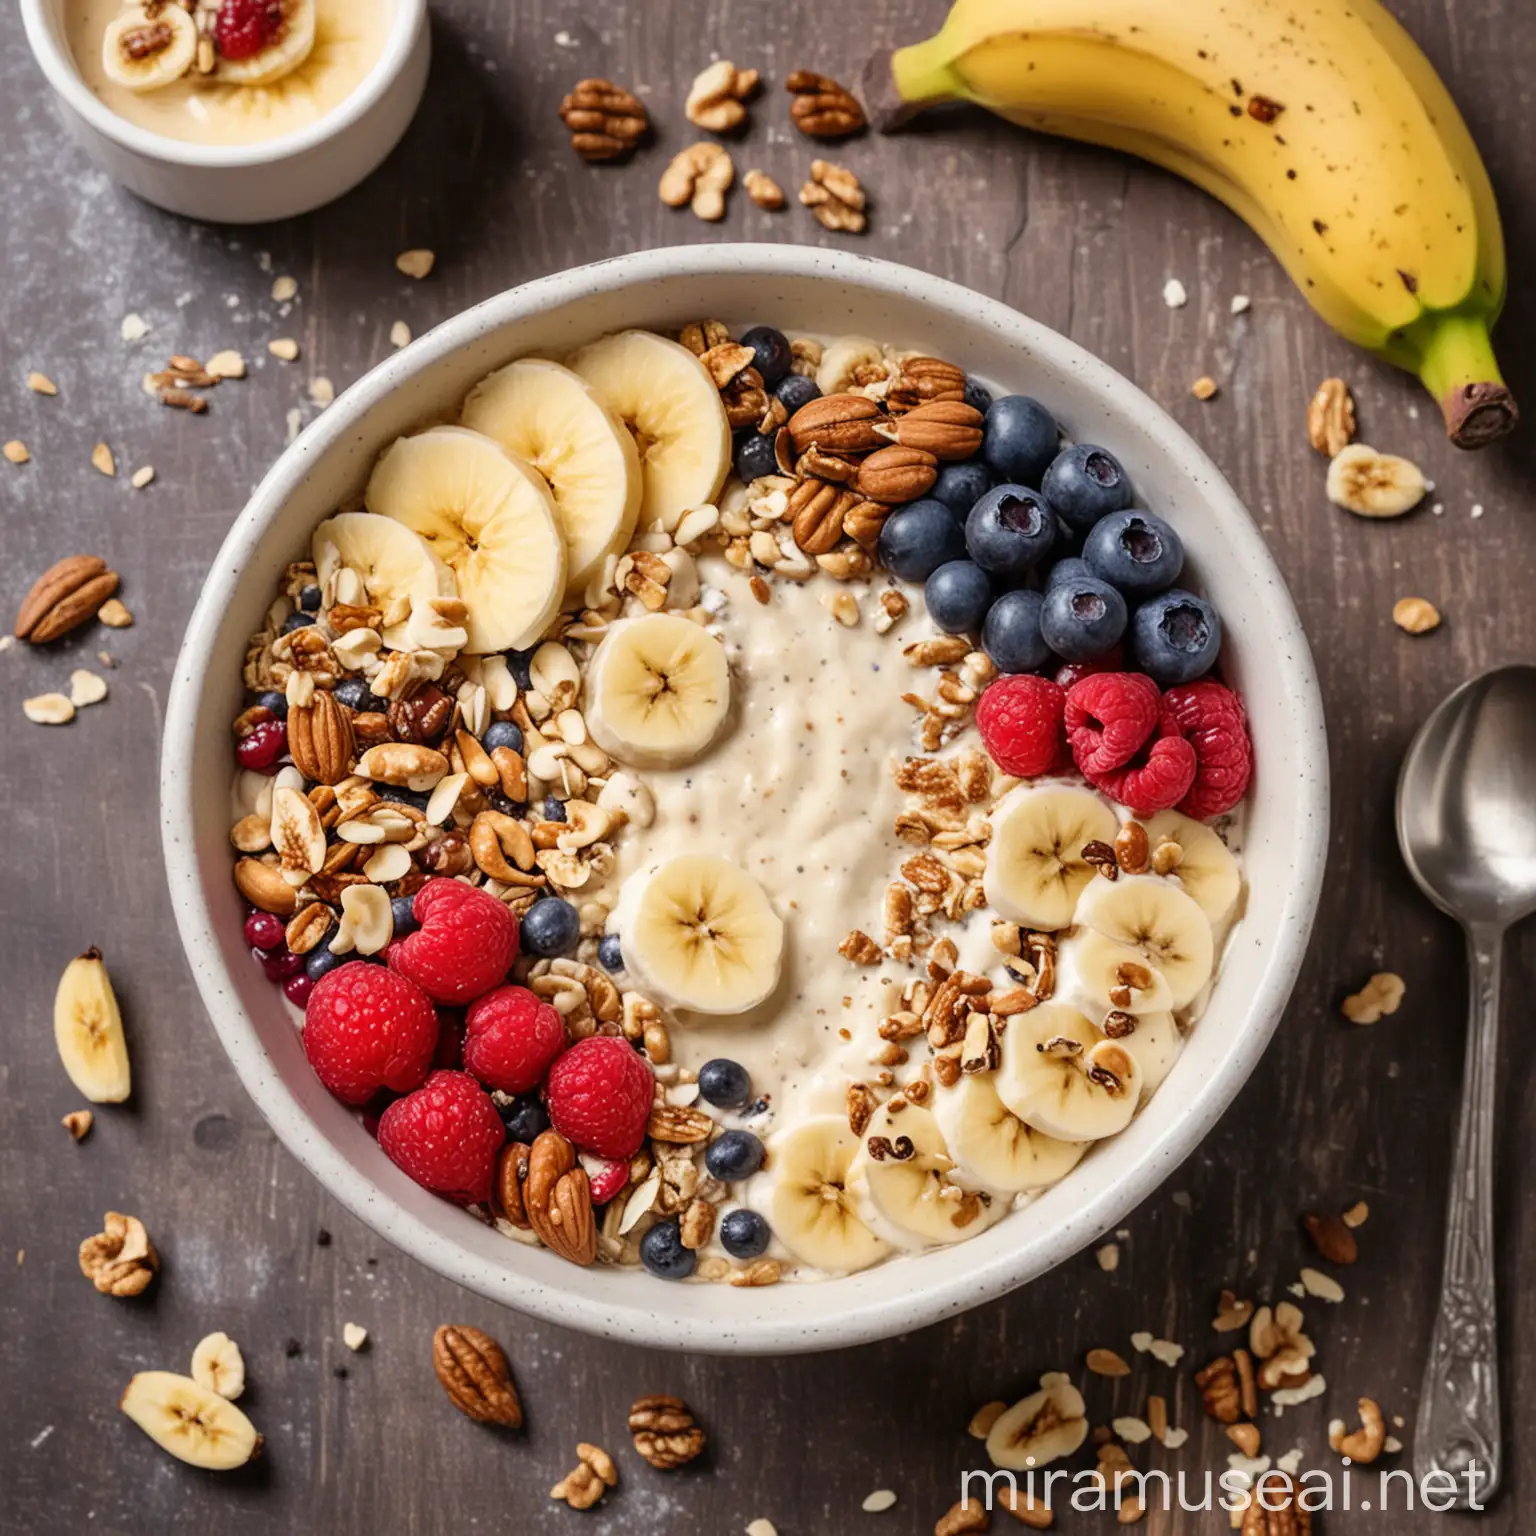 Delicious Greek Yogurt Smoothie Bowl with Fresh Fruits and Nuts